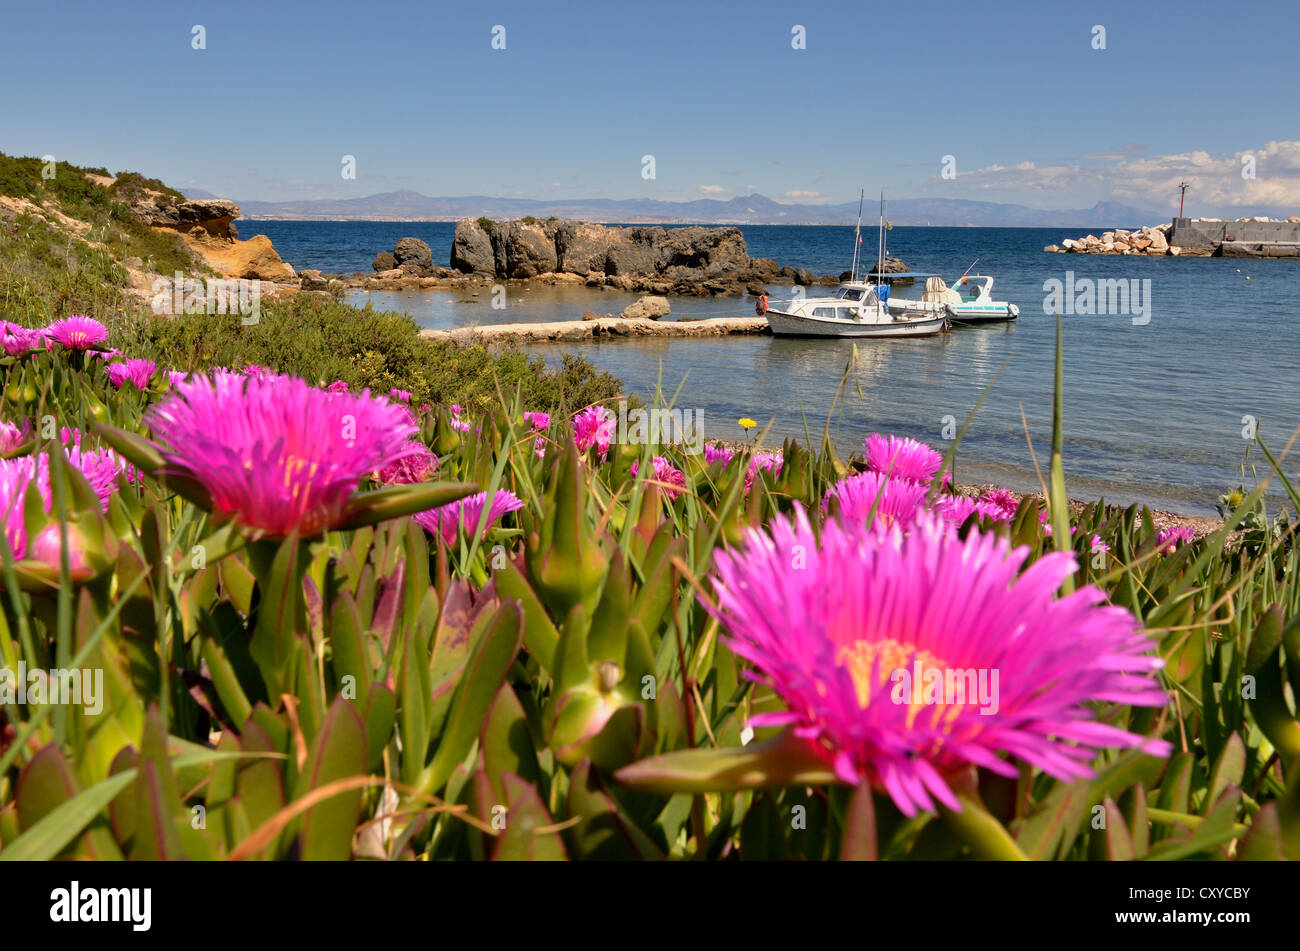 Sailing boats and flowering stonecrops (Sedum sp.), in the harbour of the Island of Tabarca, Isla de Tabarca, Alicante province Stock Photo